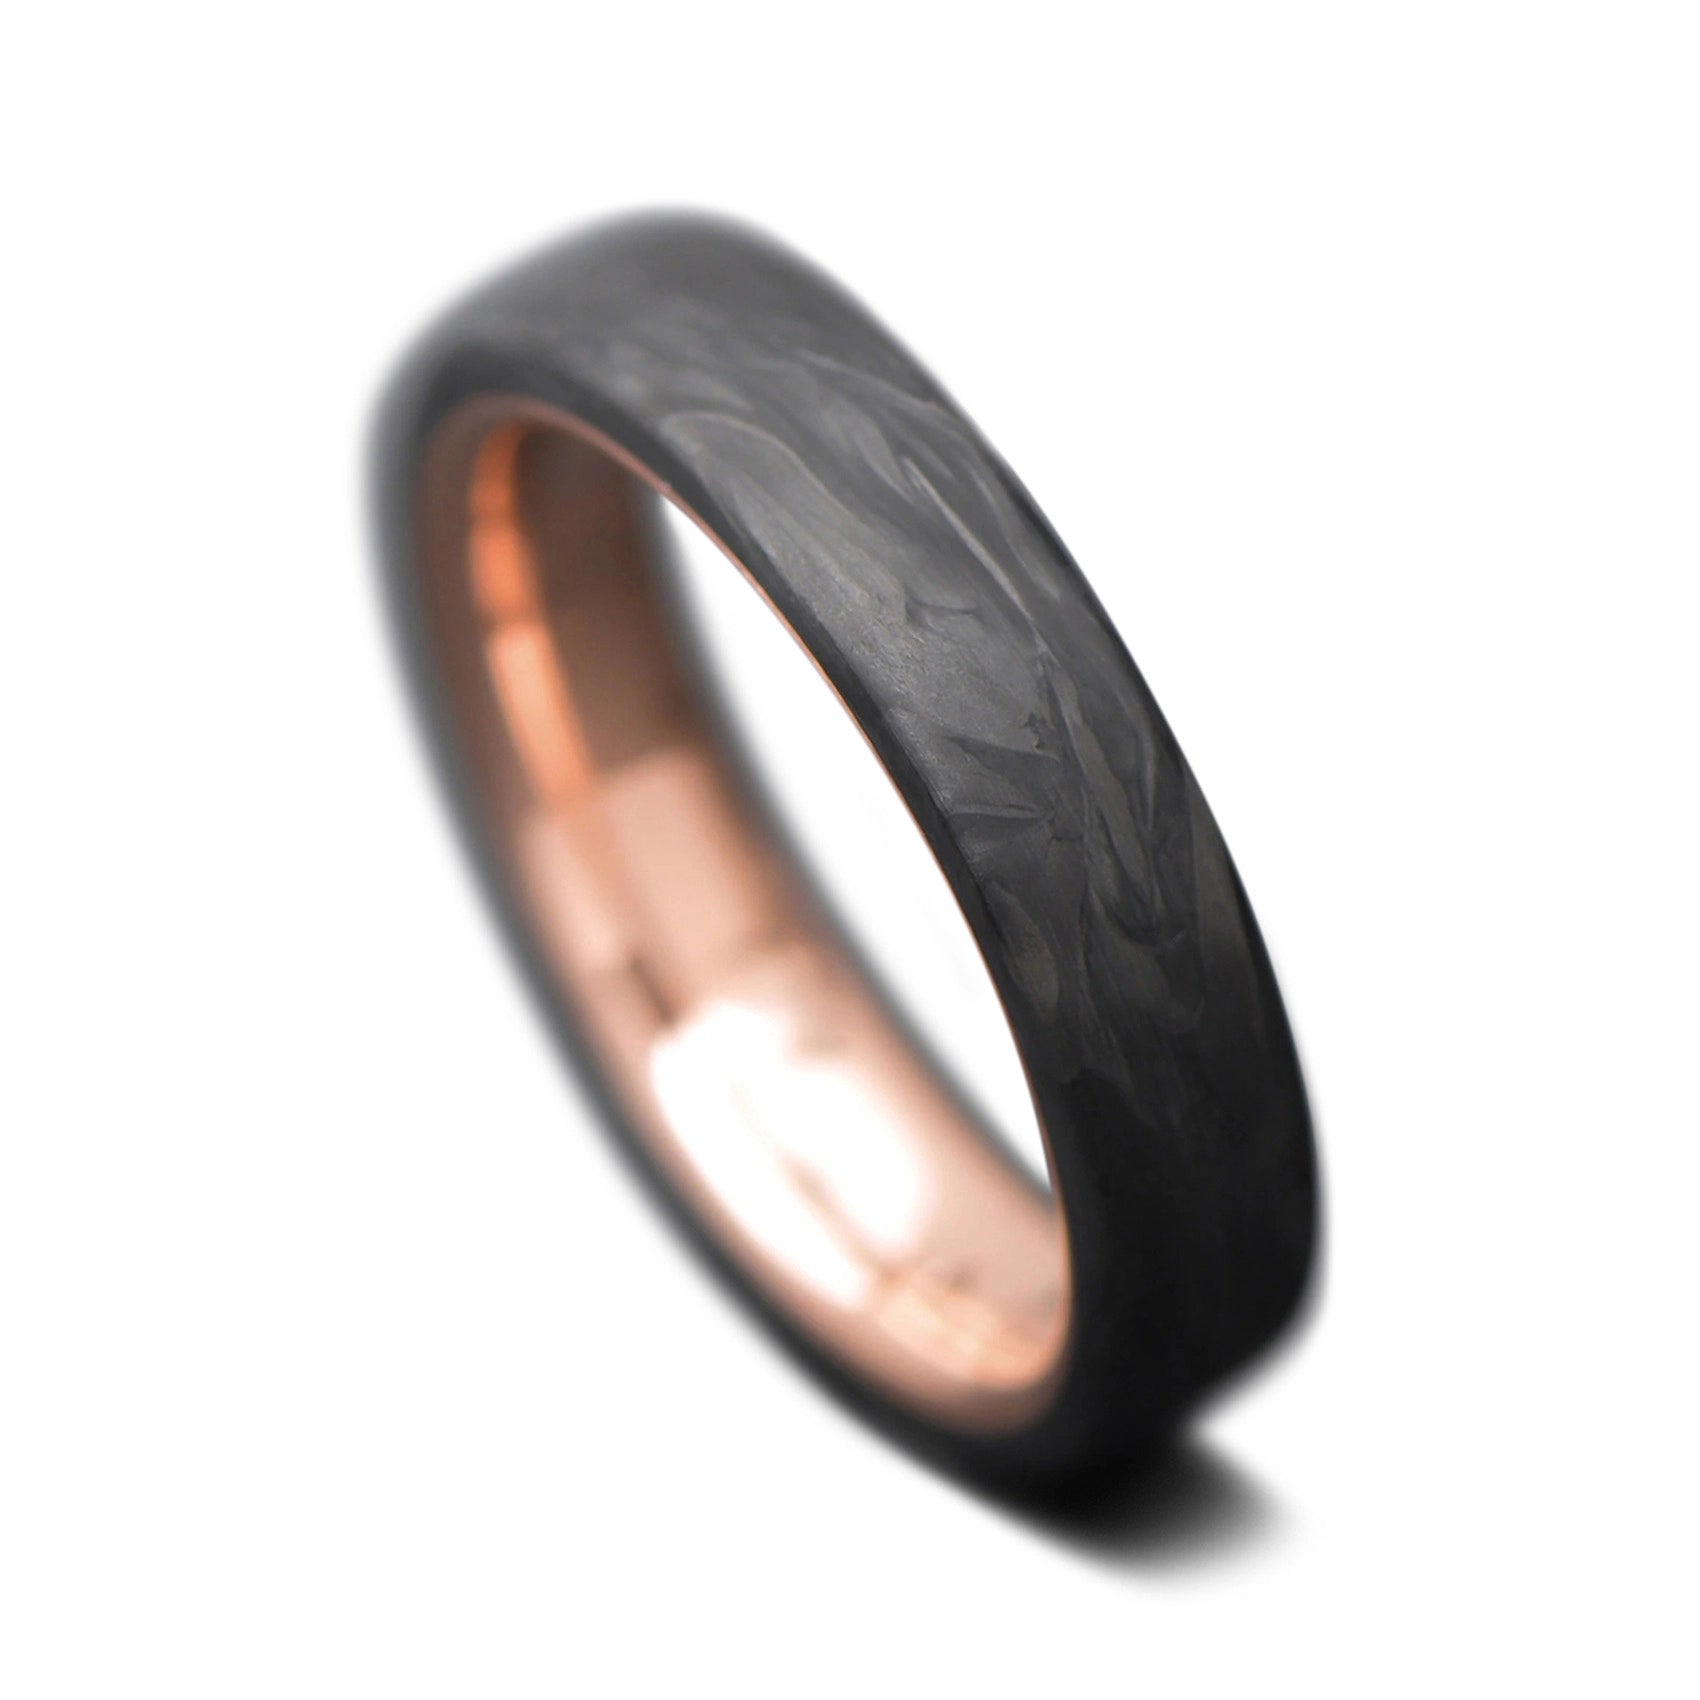  CarbonForged Core Ring with Rose Gold inner sleeve, 5mm -THE QUEST